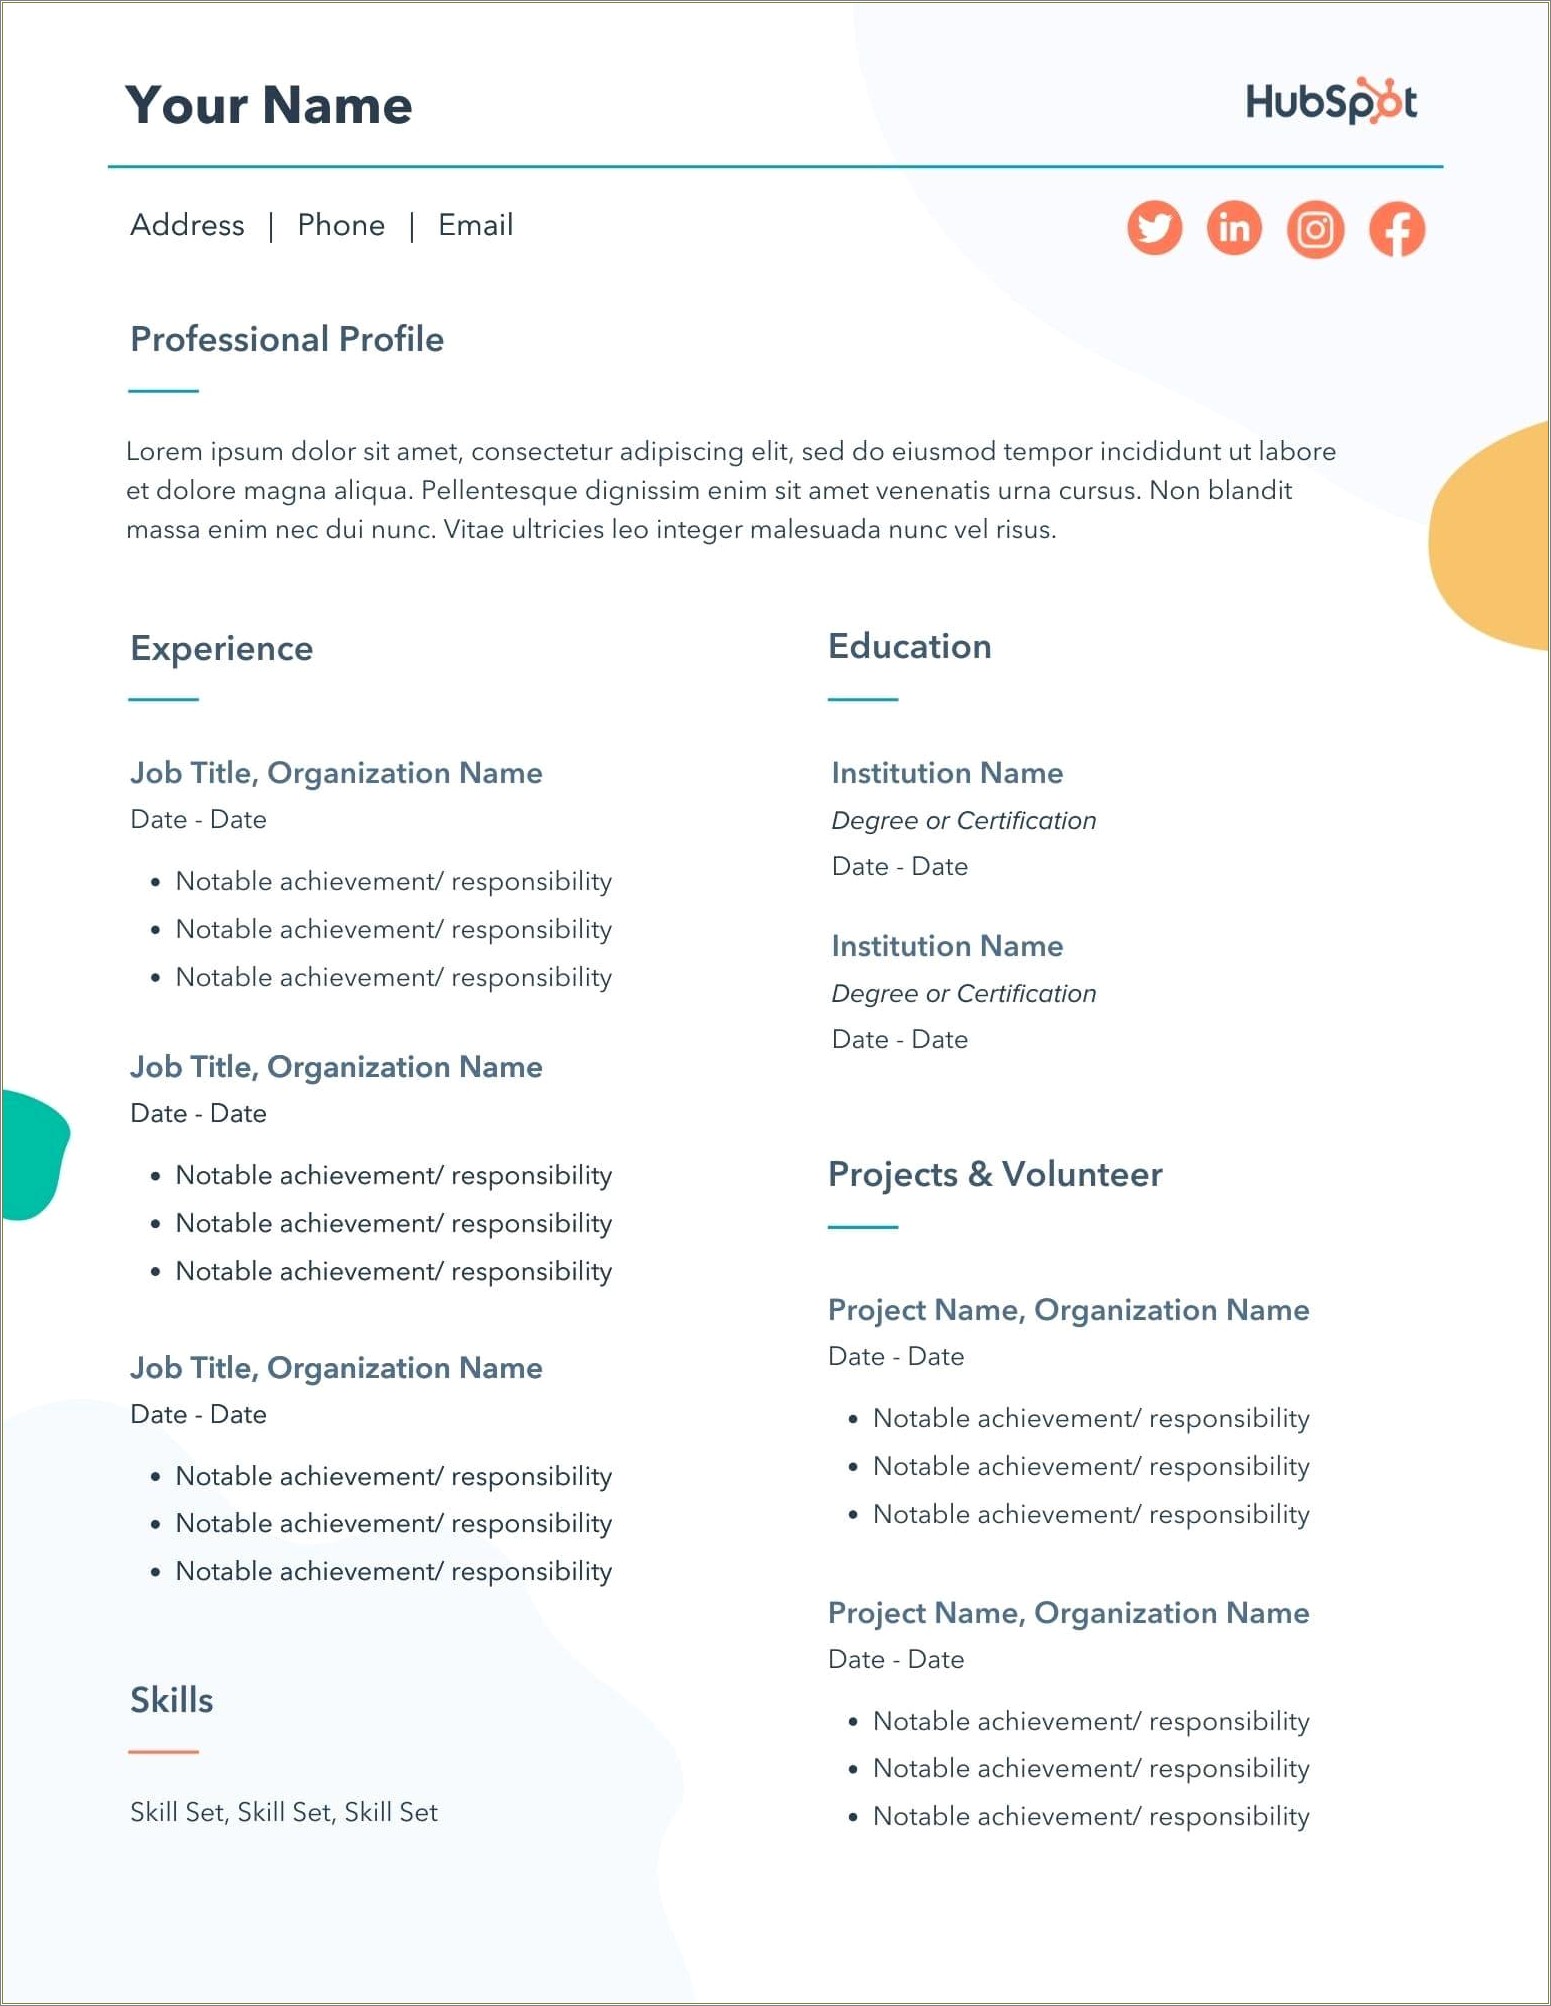 Sample Of Resumes For Director Jobs